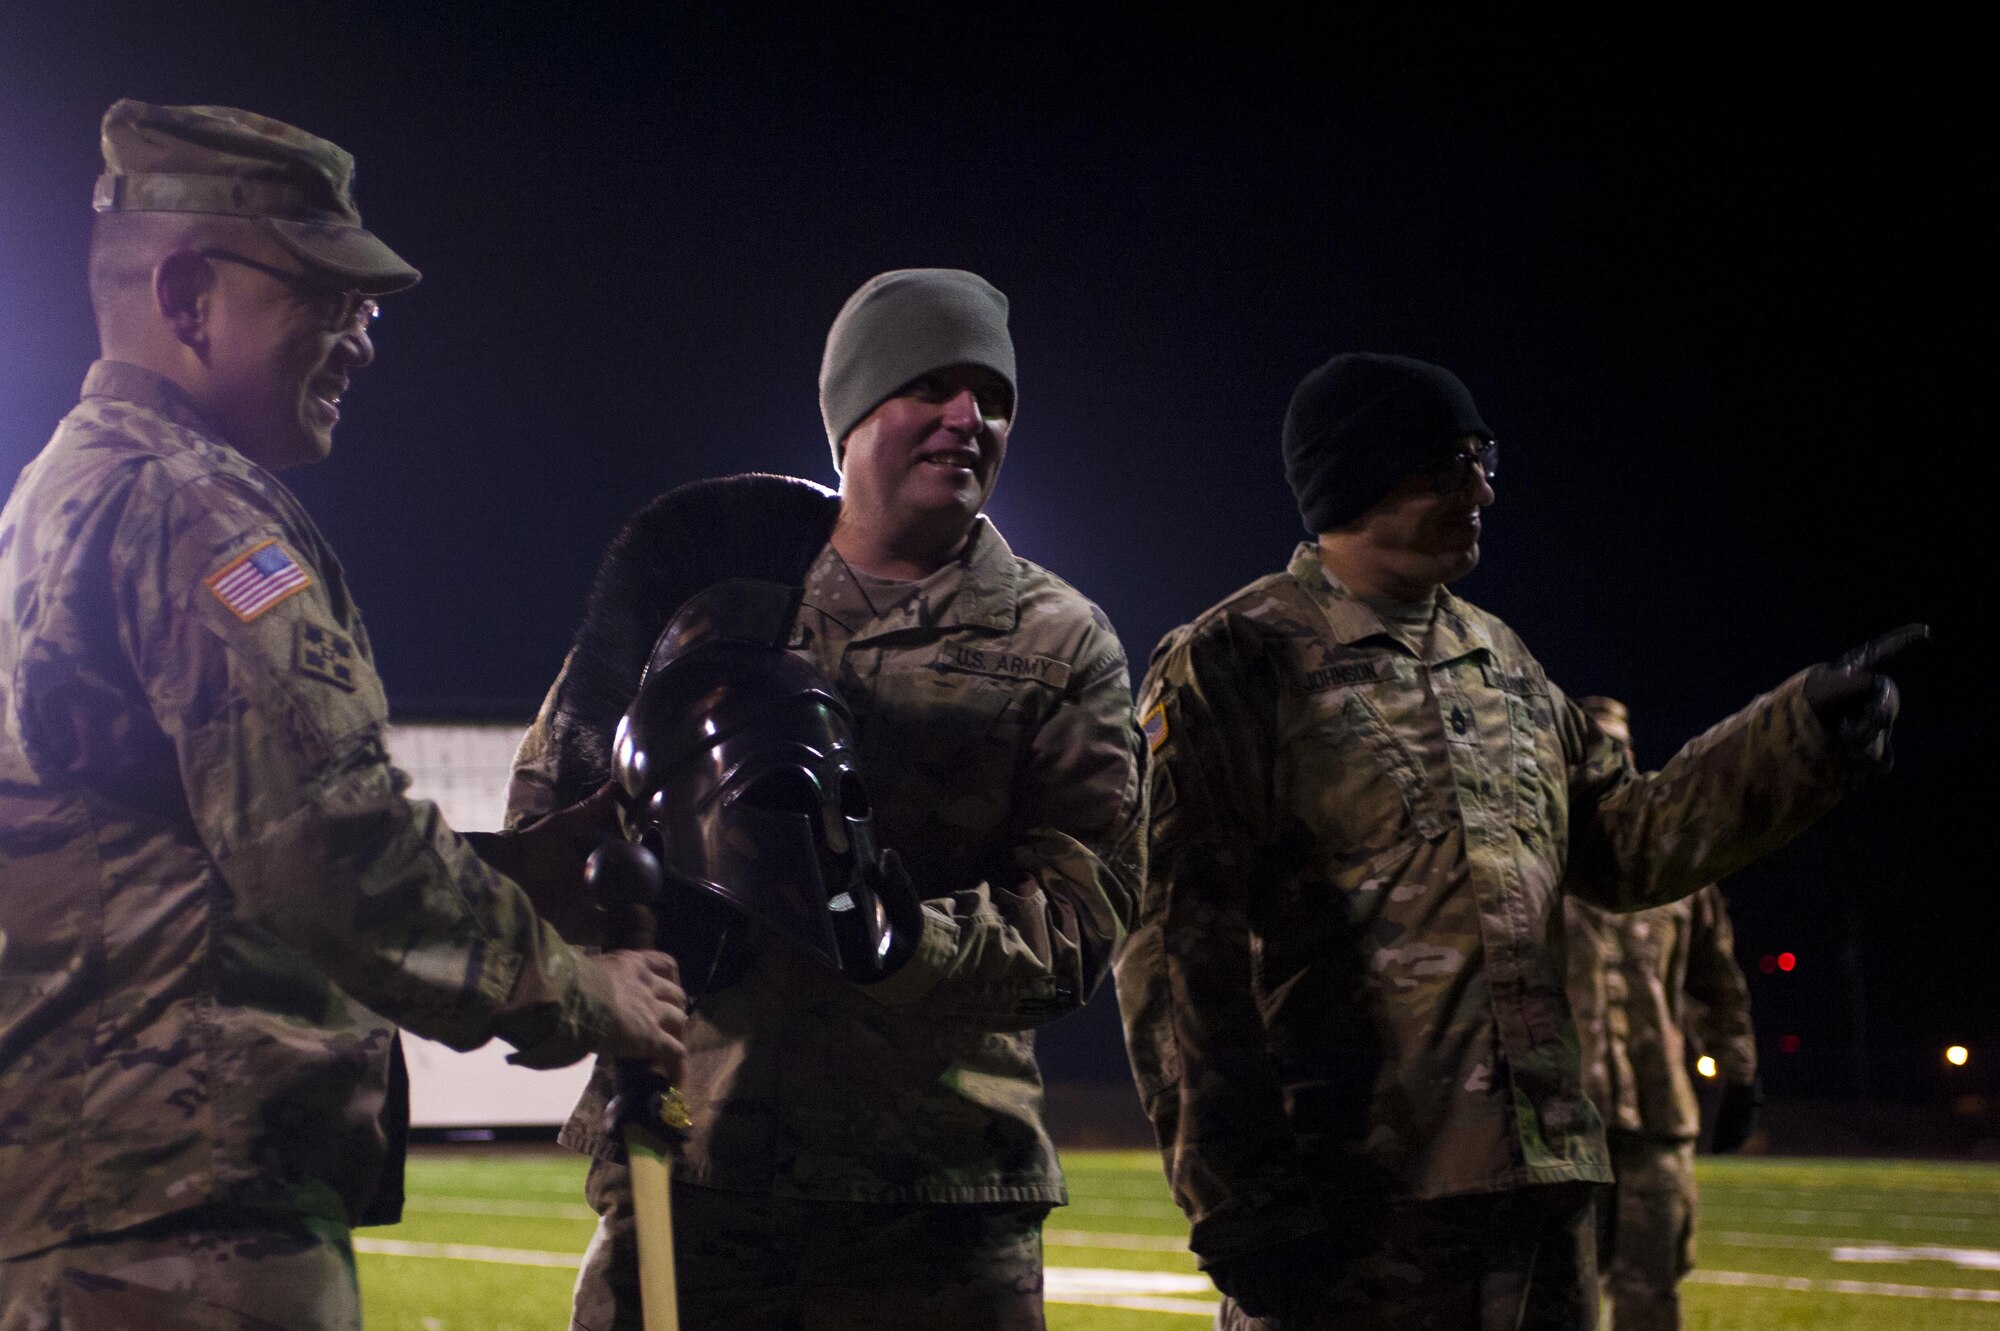 U.S. Army Lt. Col. Yukio Kuniyuki, 344th Military Intelligence Battalion Commander, presents the galea helmet and broadsword trophies to Capt. Matthew Bontrager, 344th MIB Alpha Company commander, and 1st Sgt. Joseph Johnson, 344th MIB Alpha Company first sergeant, at the Mathis football field on Goodfellow Air Force Base, Texas, February 3, 2017. This competition is held each year to help build comradery between soldiers. (U.S. Air Force photo by Senior Airman Scott Jackson/released)